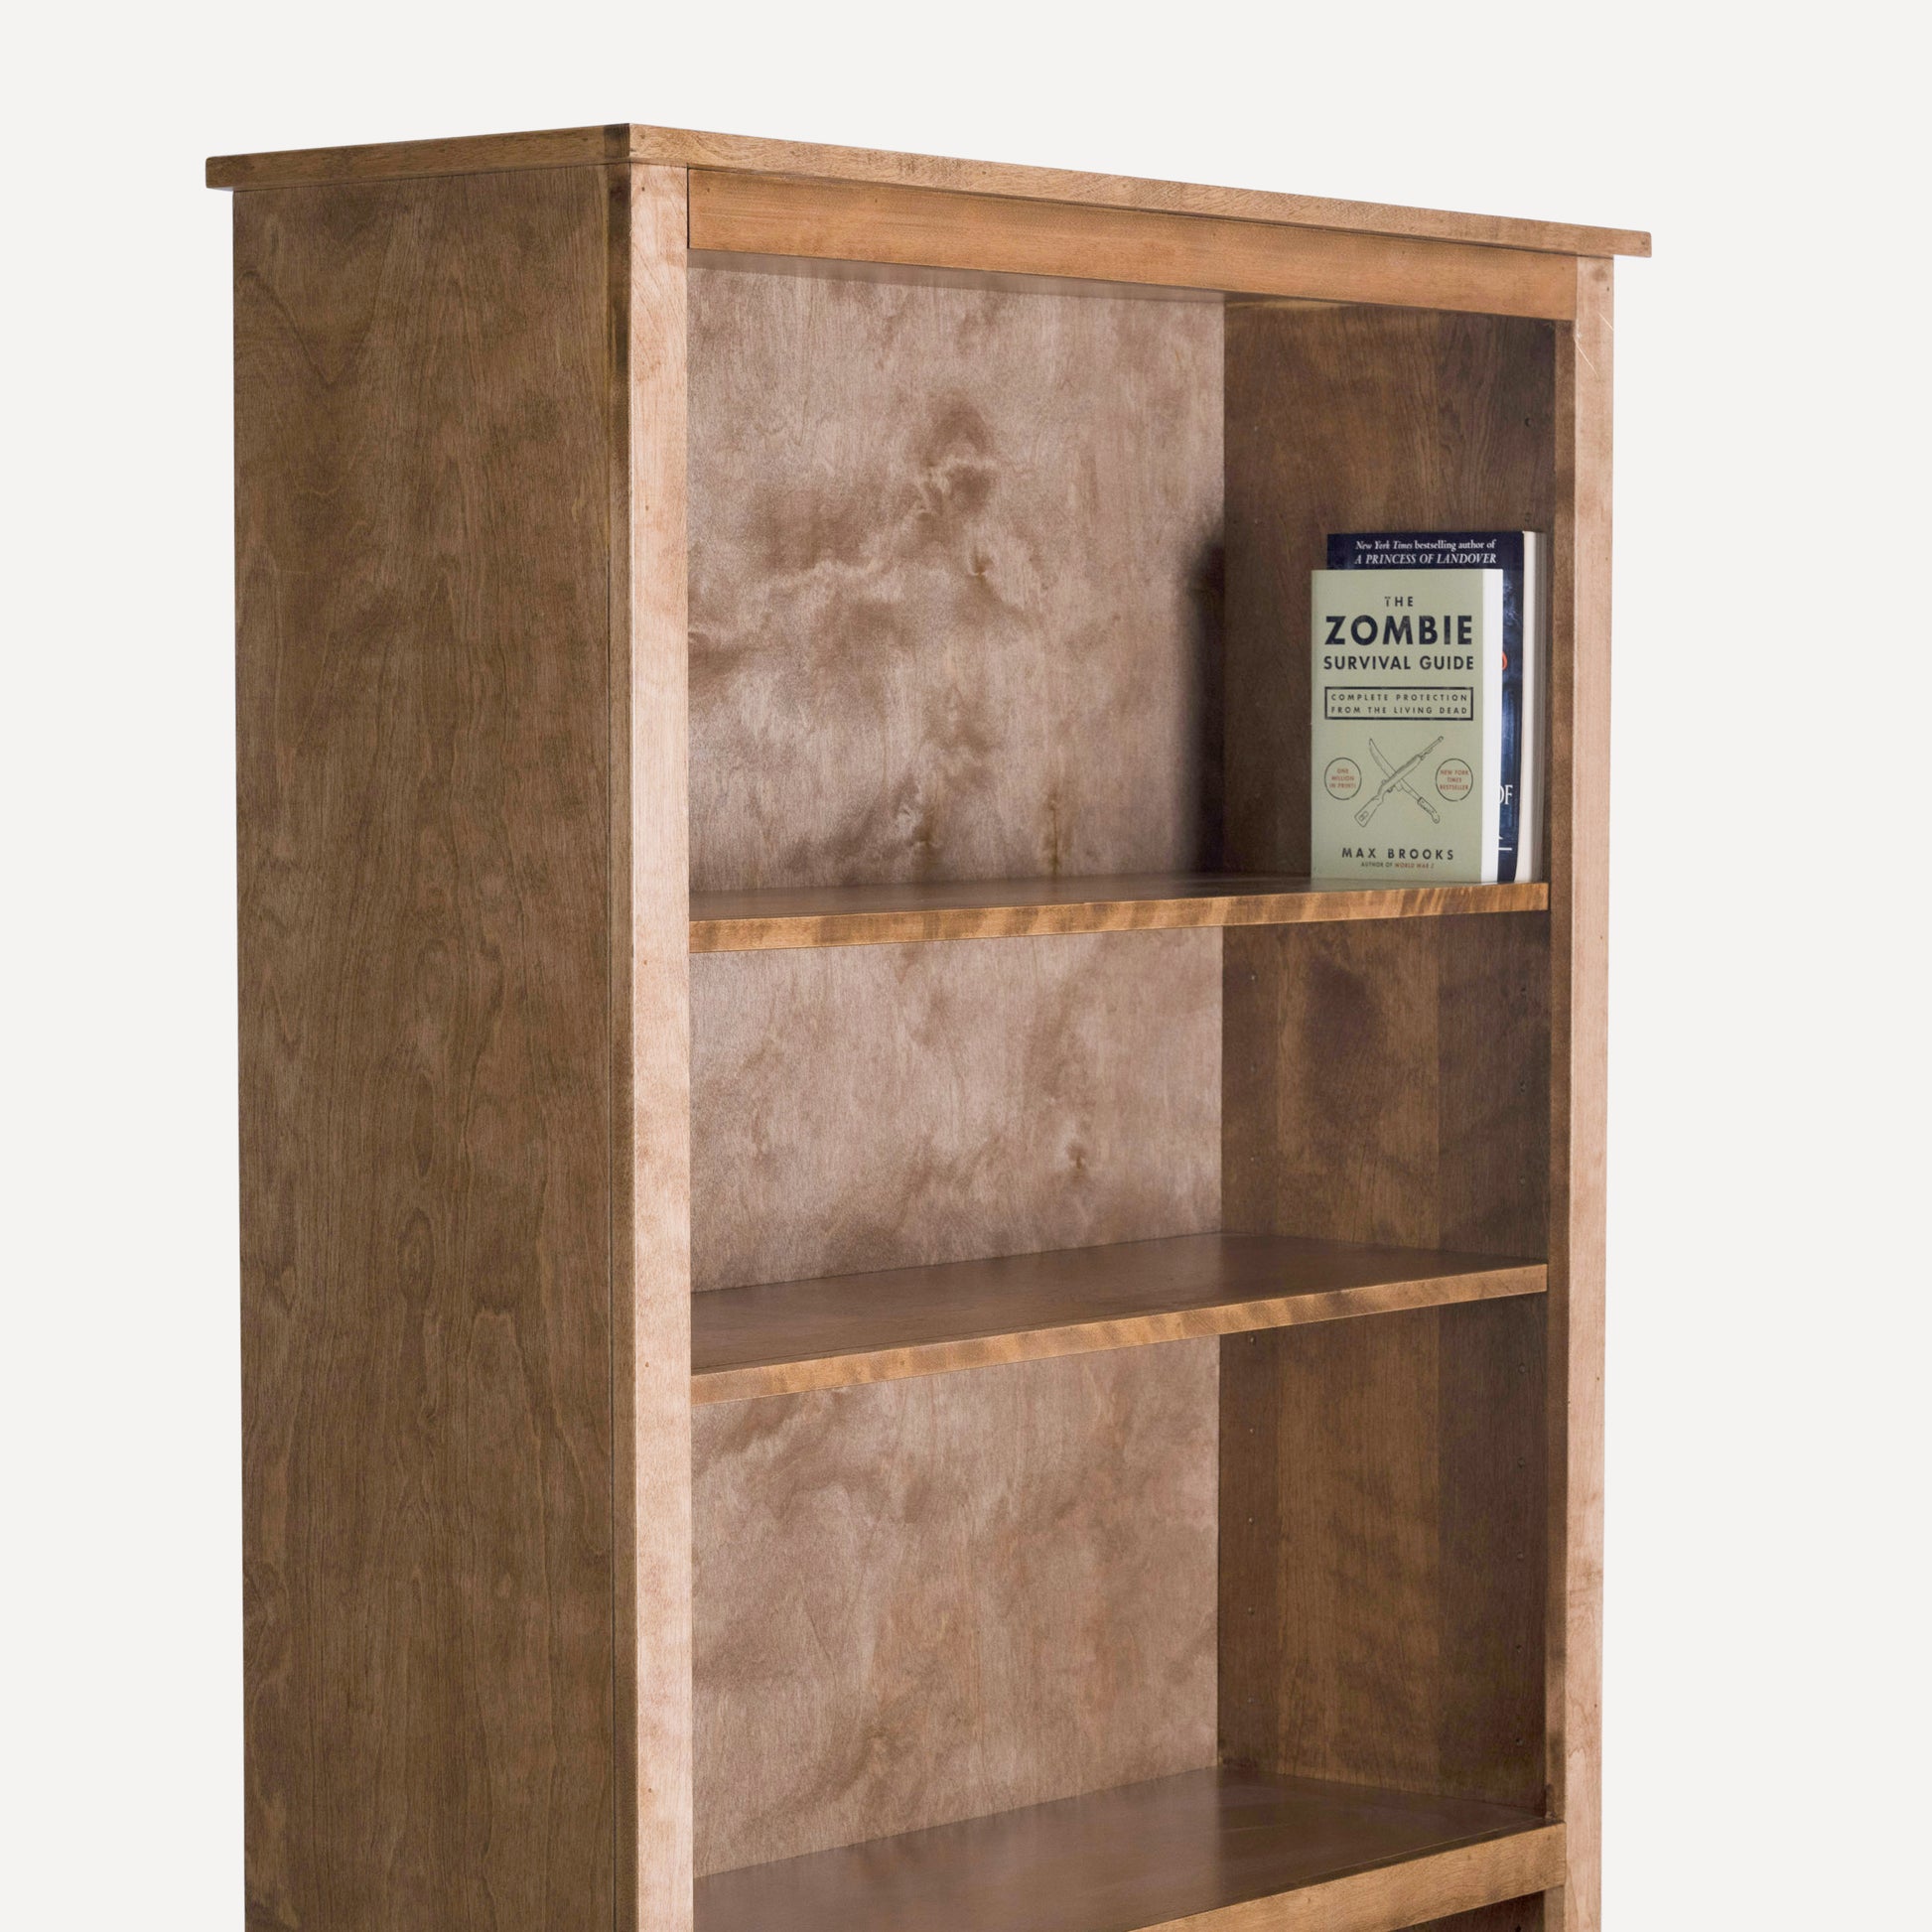 Berkshire Easton Bookcase, built in birch and shown close up to highlight edge details. Pictured in Distressed Pecan finish.